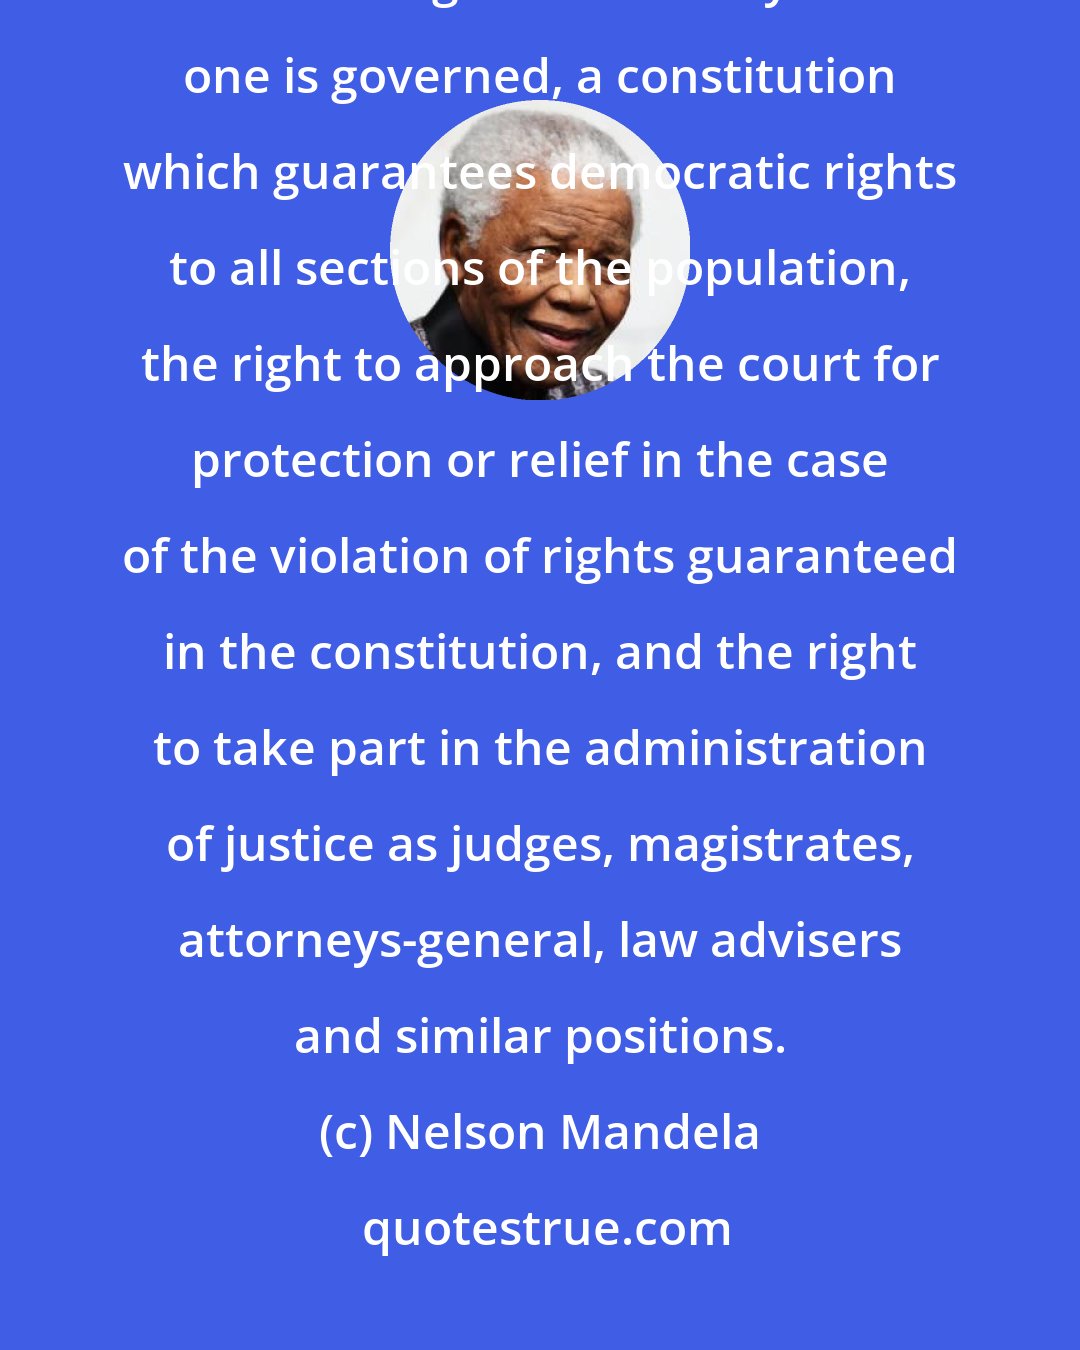 Nelson Mandela: In its proper meaning equality before the law means the right to participate in the making of the laws by which one is governed, a constitution which guarantees democratic rights to all sections of the population, the right to approach the court for protection or relief in the case of the violation of rights guaranteed in the constitution, and the right to take part in the administration of justice as judges, magistrates, attorneys-general, law advisers and similar positions.